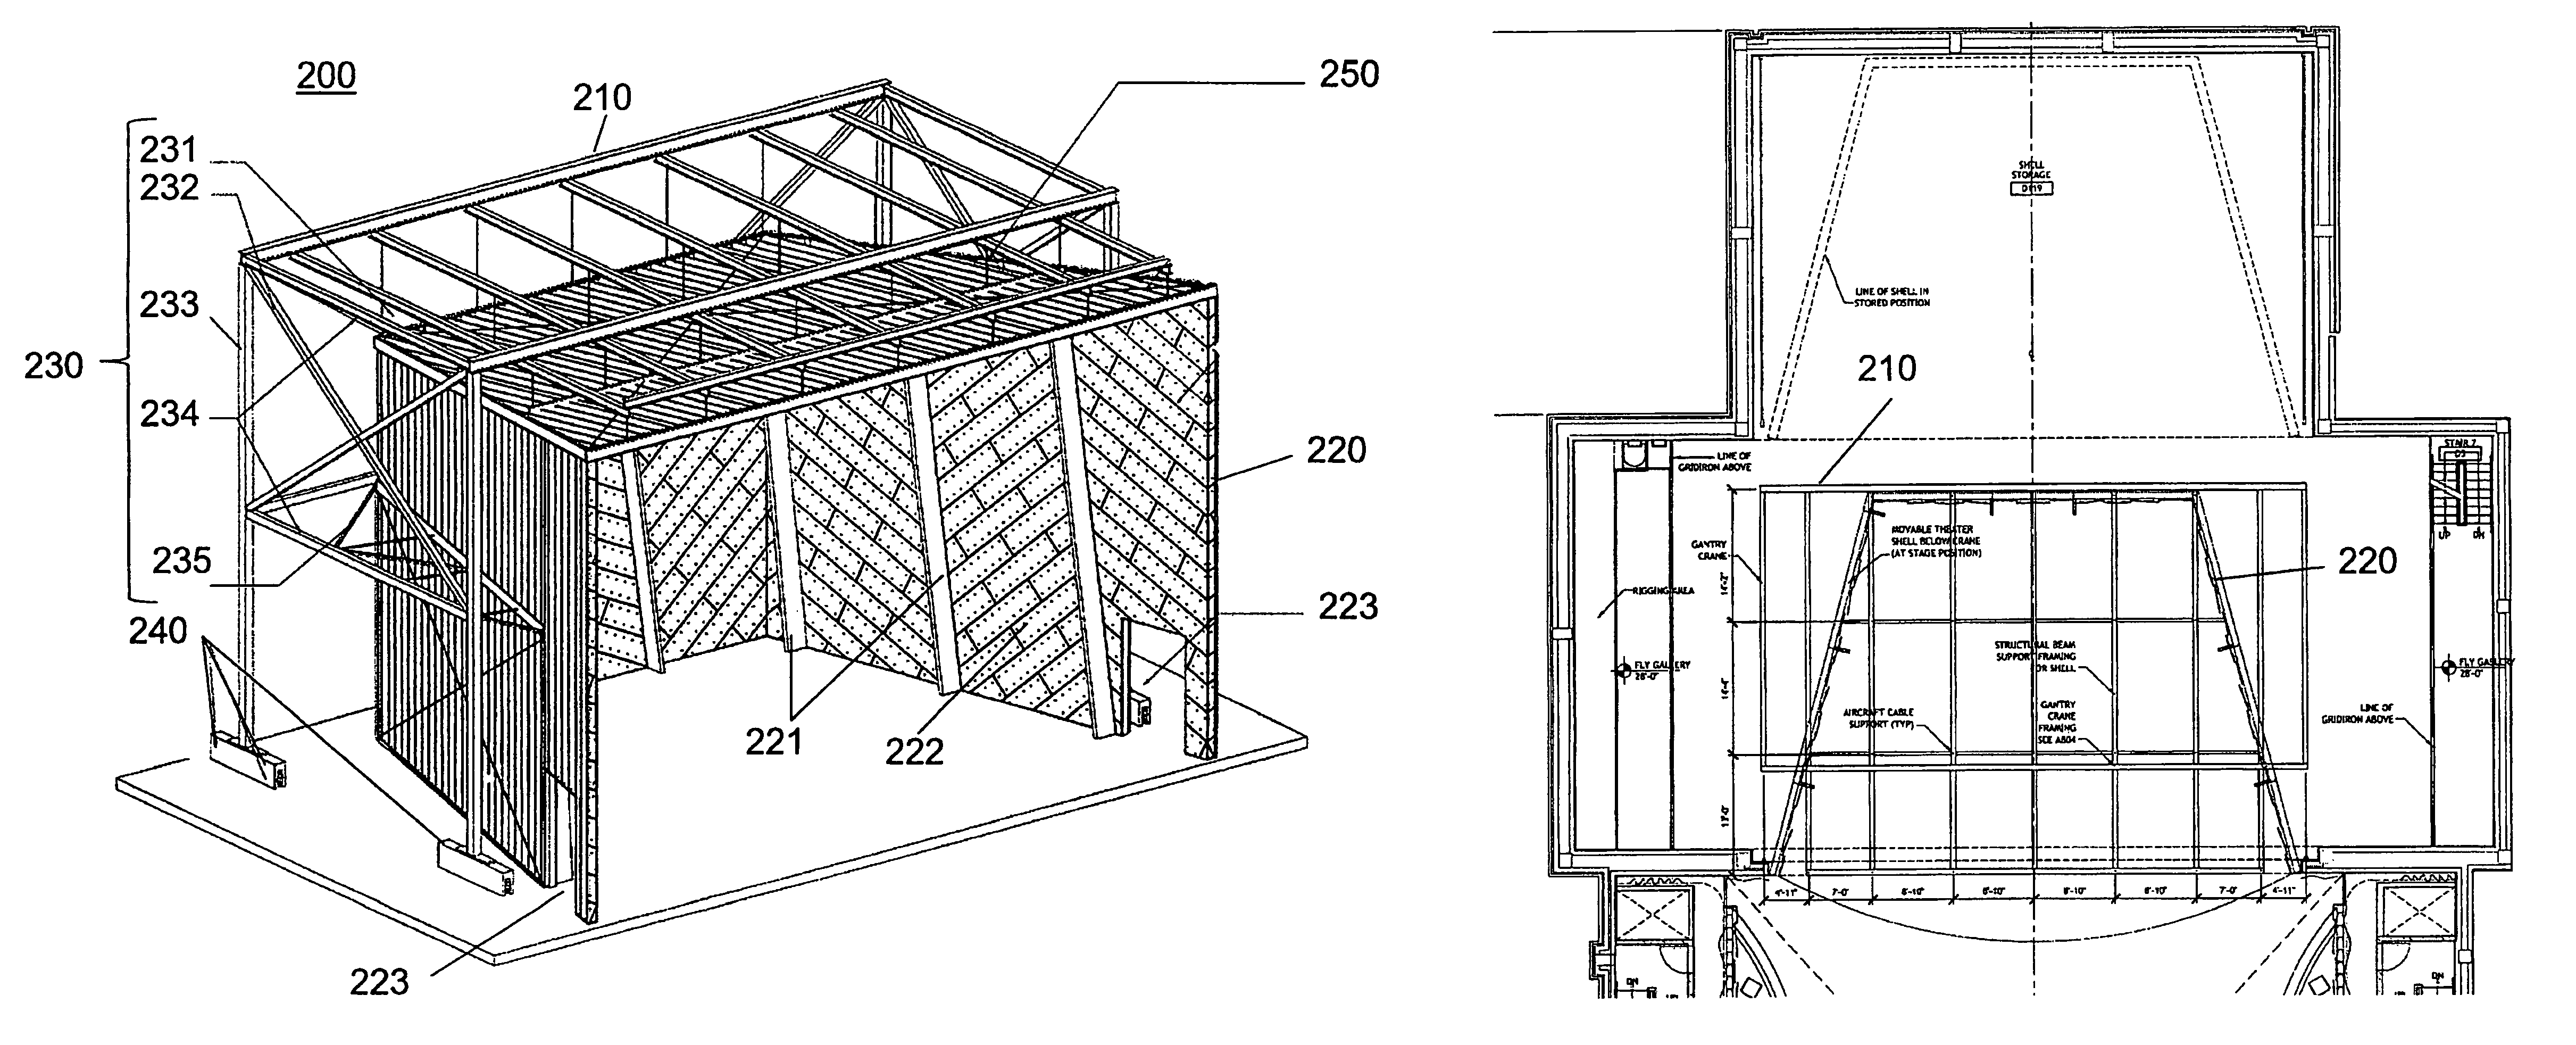 Movable acoustic shell assembly